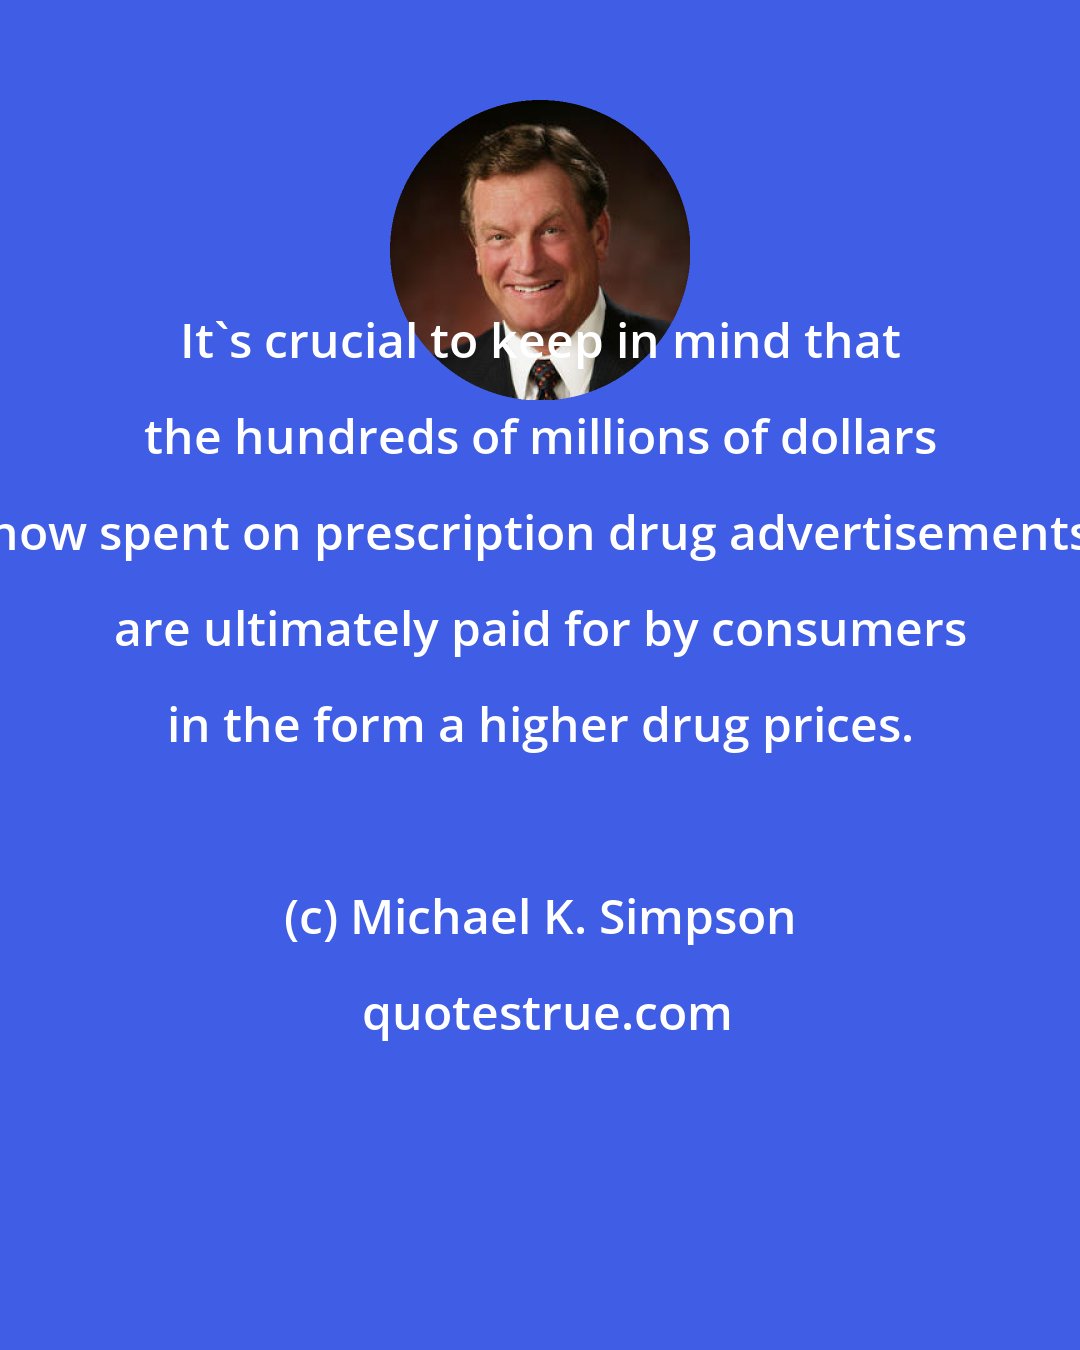 Michael K. Simpson: It's crucial to keep in mind that the hundreds of millions of dollars now spent on prescription drug advertisements are ultimately paid for by consumers in the form a higher drug prices.